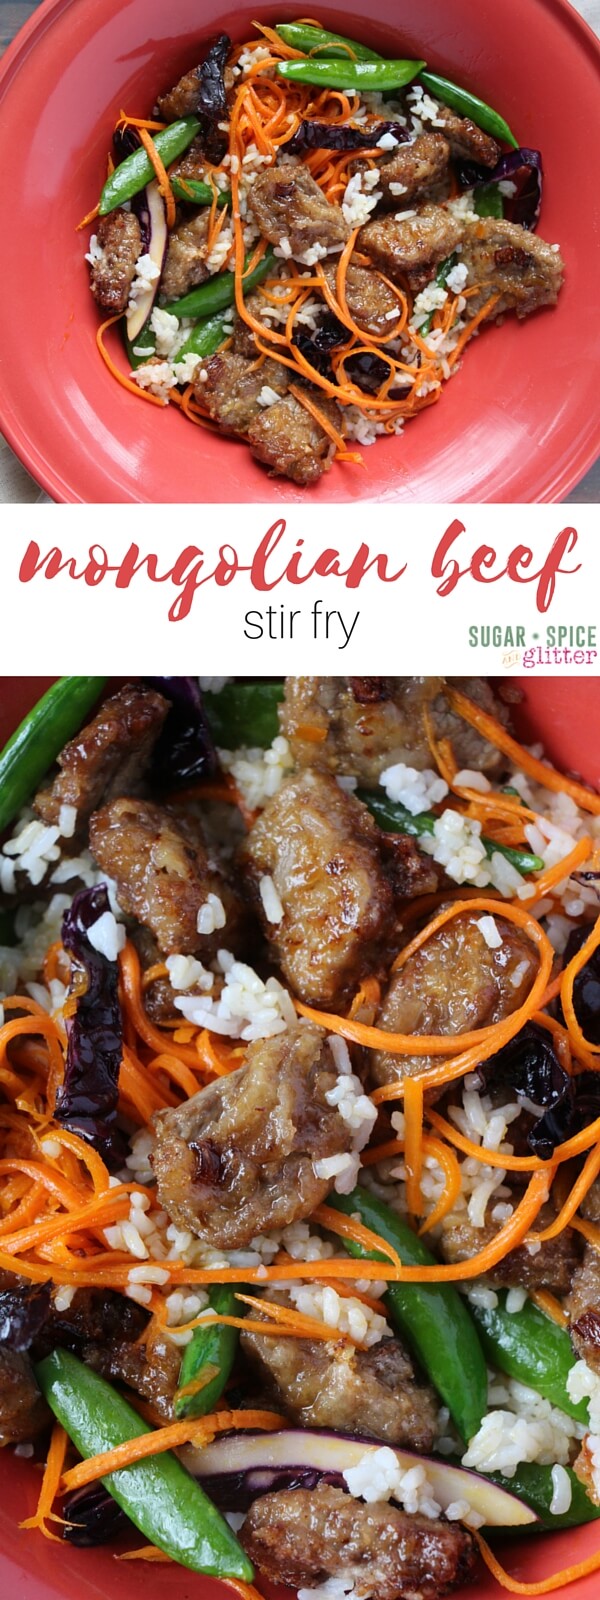 Mongolian Beef Stir Fry ⋆ Sugar, Spice and Glitter